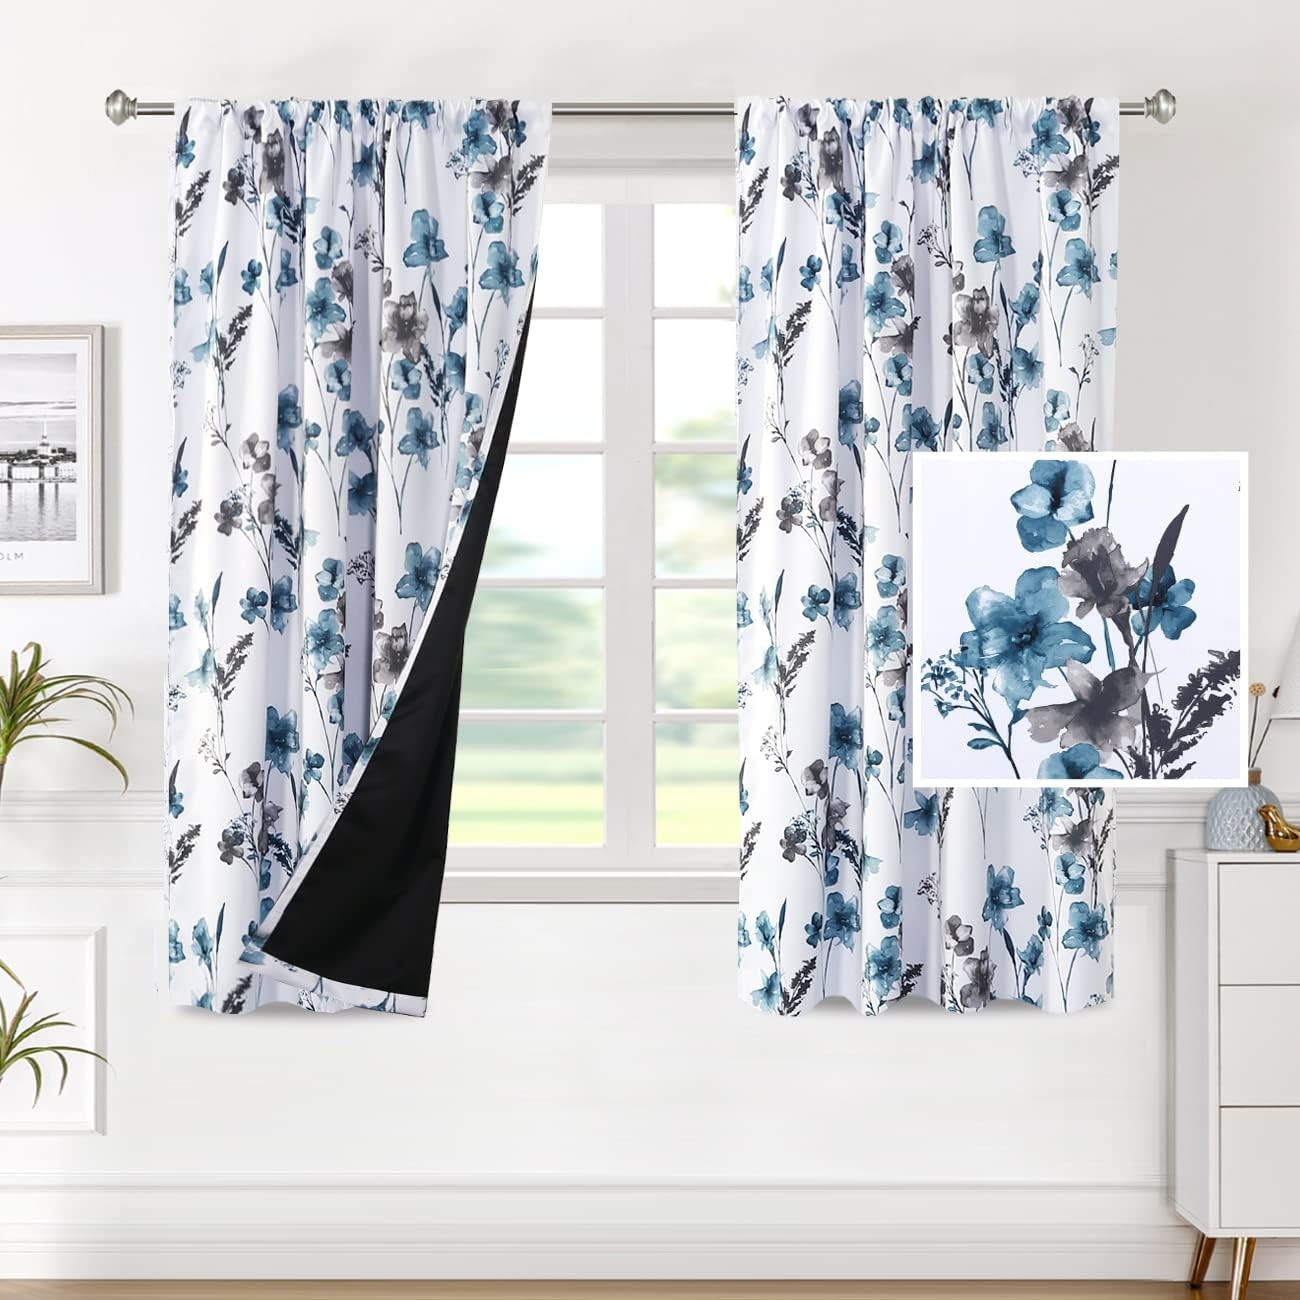 H.VERSAILTEX 100% Blackout Curtains for Bedroom Cattleya Floral Printed Drapes 84 Inches Long Leah Floral Pattern Full Light Blocking Drapes with Black Liner Rod Pocket 2 Panels, Navy/Taupe  H.VERSAILTEX Grey/Blue 52"W X 63"L 